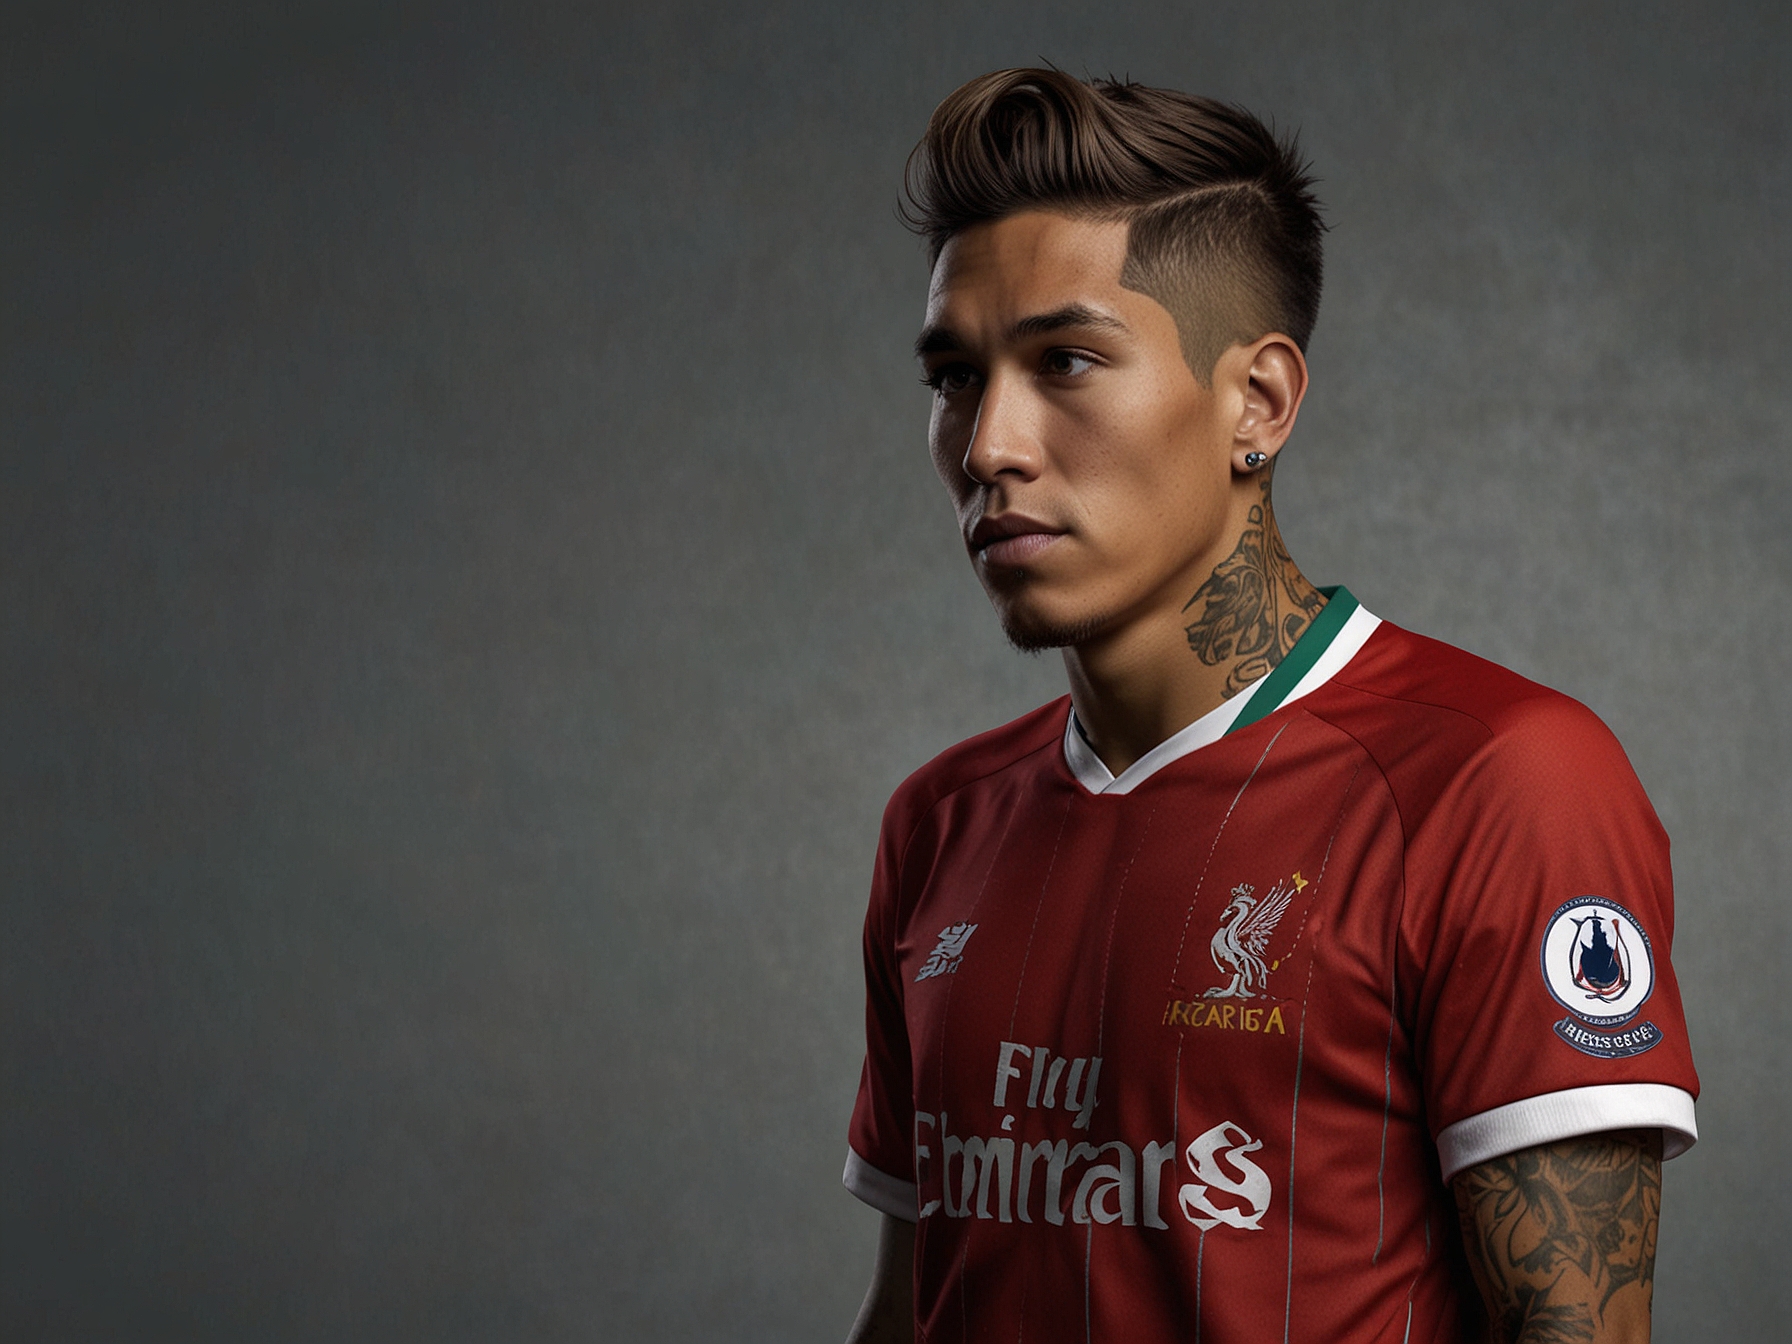 Roberto Firmino confidently poses in an unexpected English club's shirt, sparking speculation about his future move and causing a massive stir among football fans and pundits.